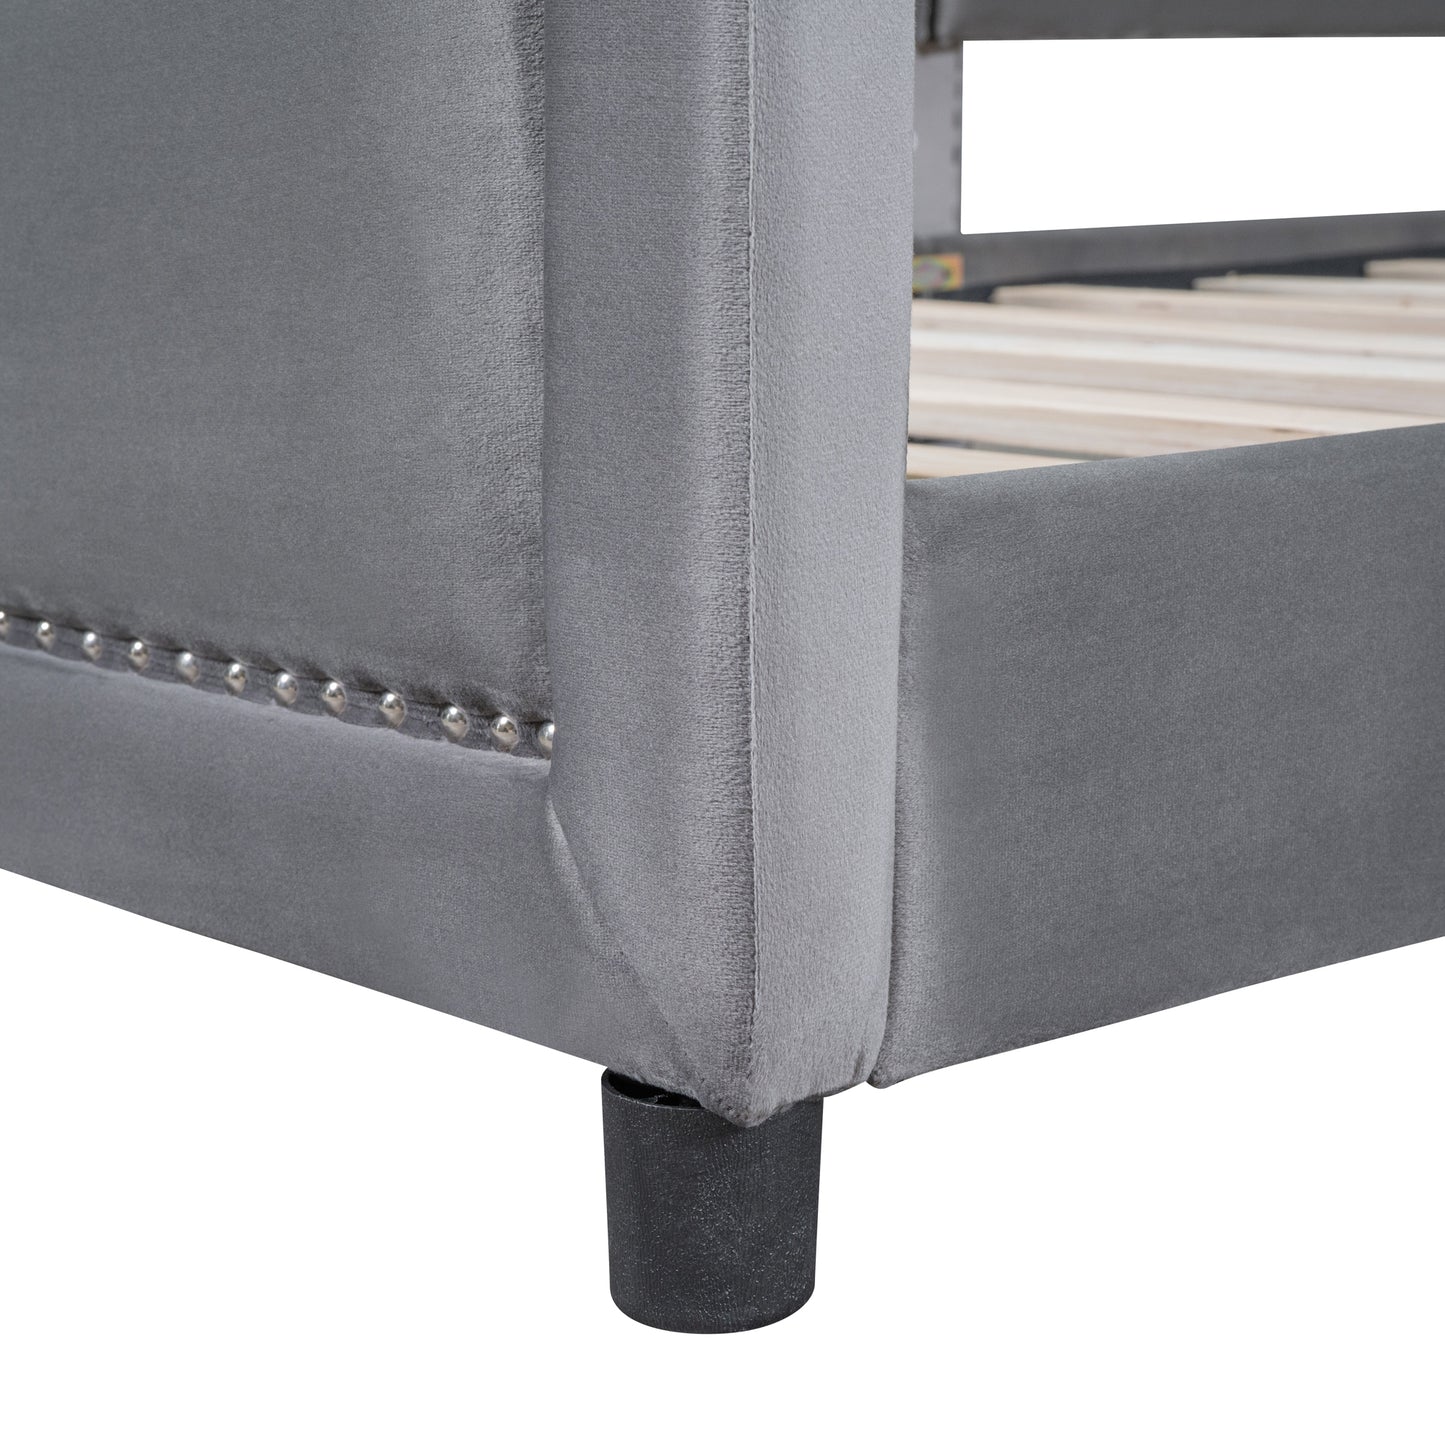 Twin Size Upholstered Daybed with Classic Stripe Shaped  Headboard, Gray